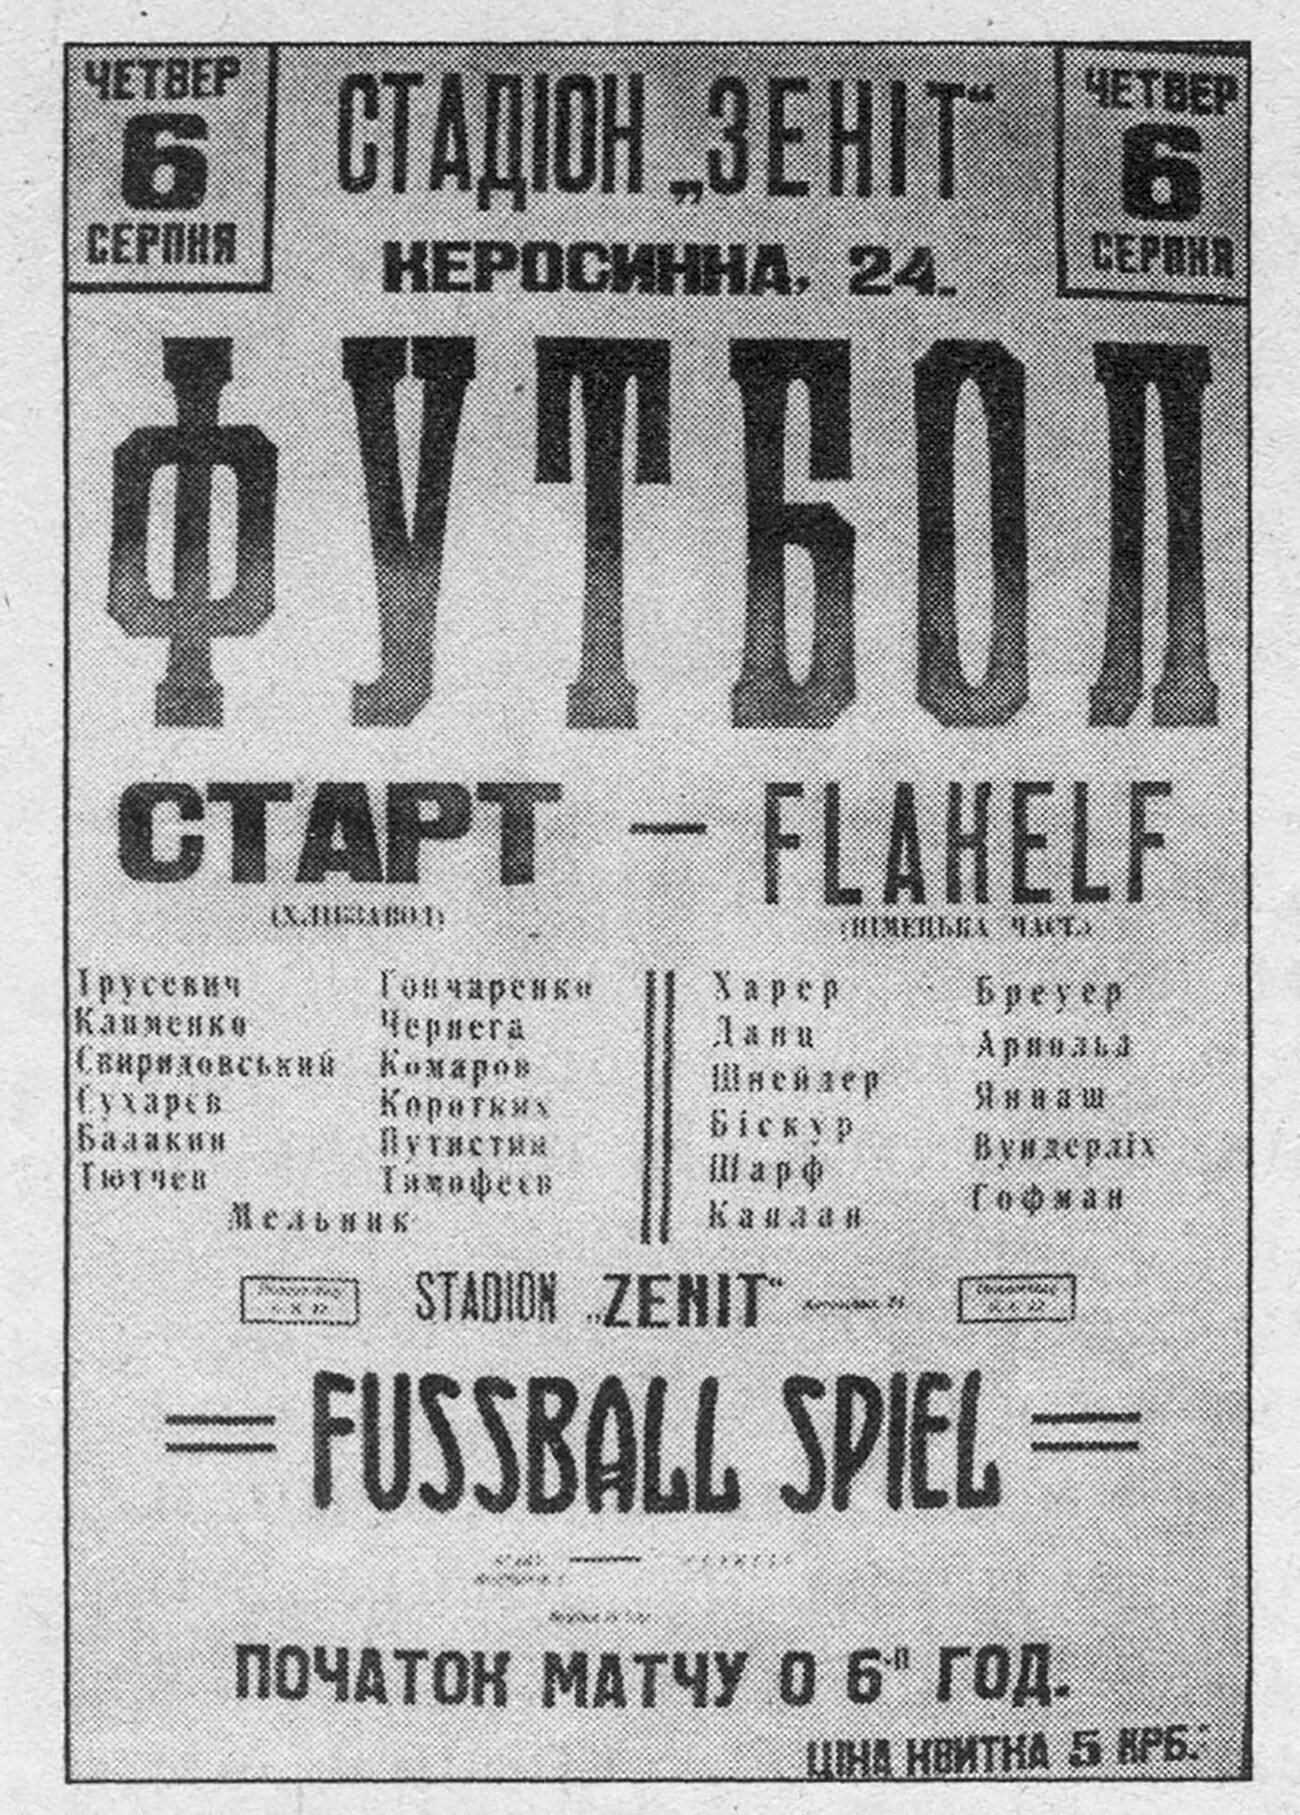 Poster of the match between 'Start' and 'Flakelf'.